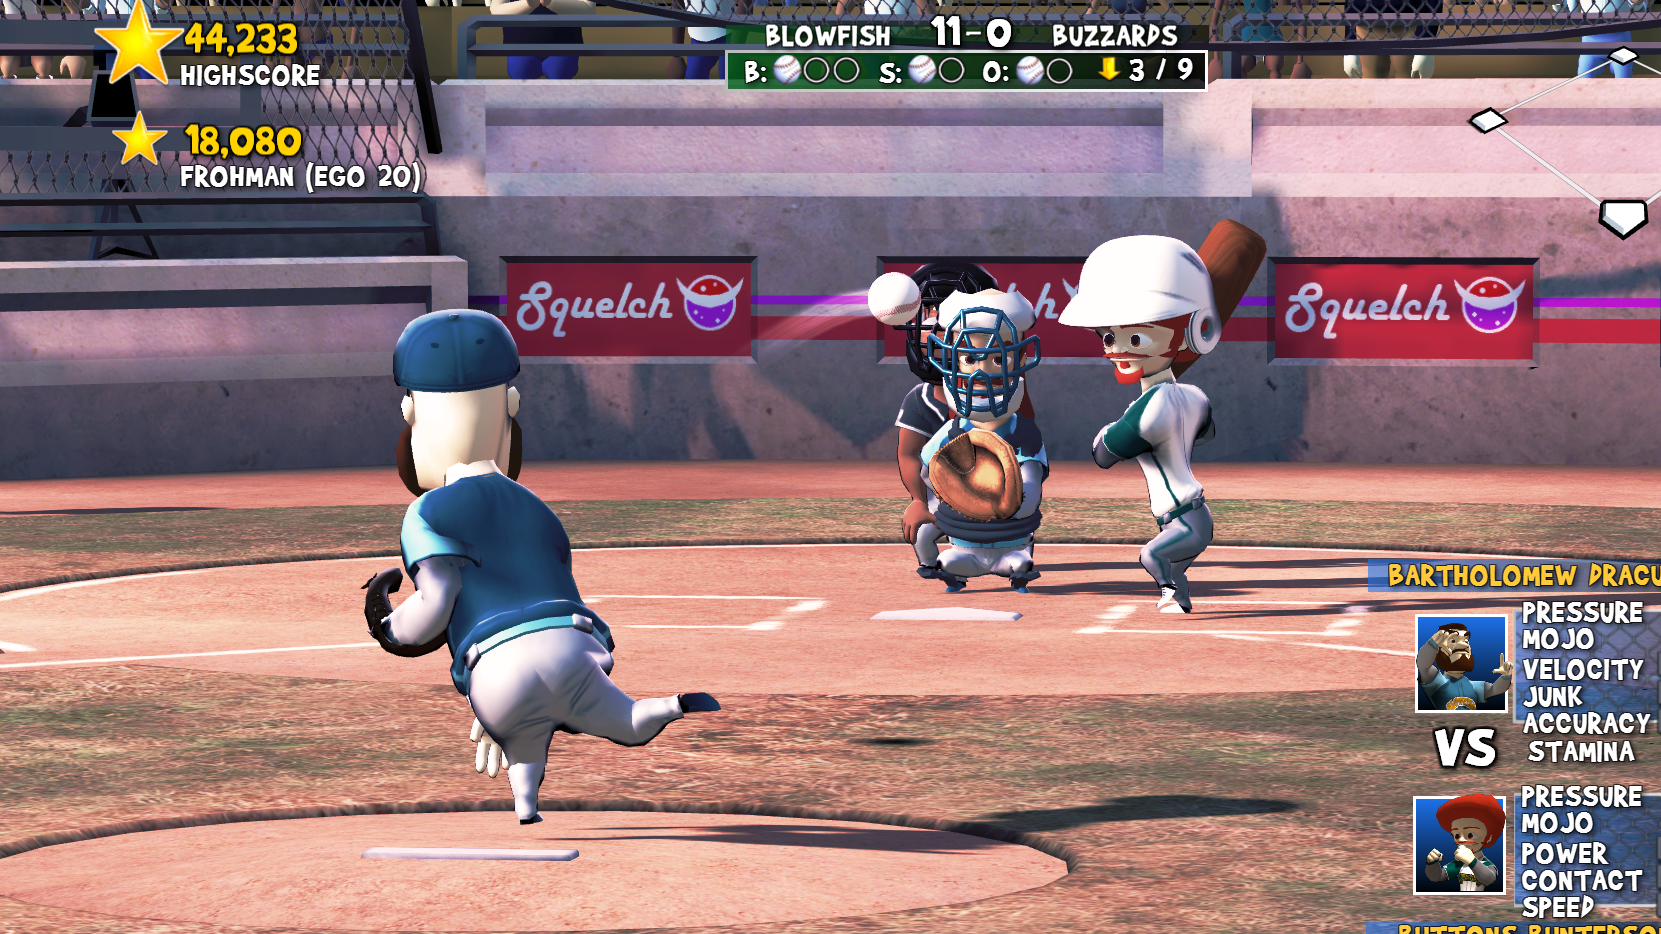 Super Mega Baseball 3 may be the only baseball video game you will